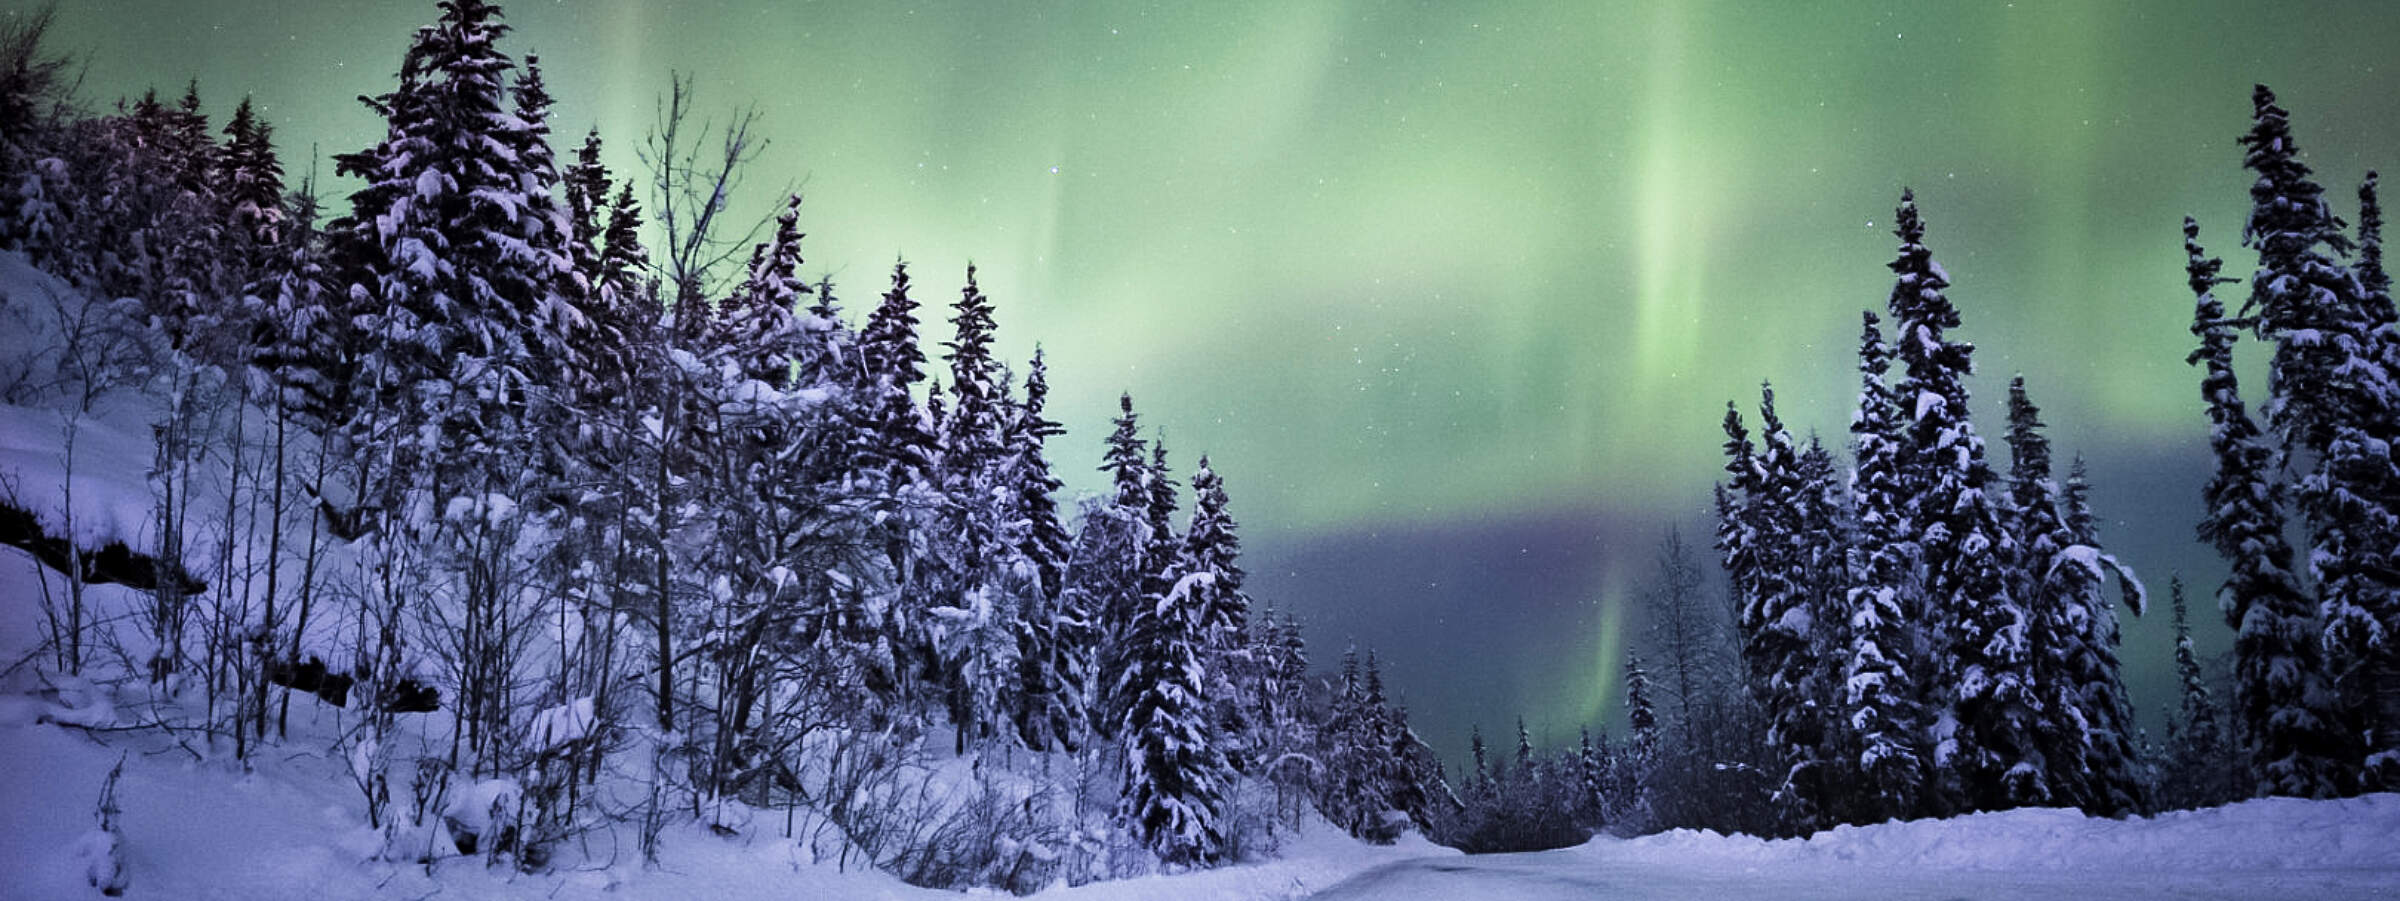 Green northern lights dance over a snow-covered road lined with snow-covered spruce trees